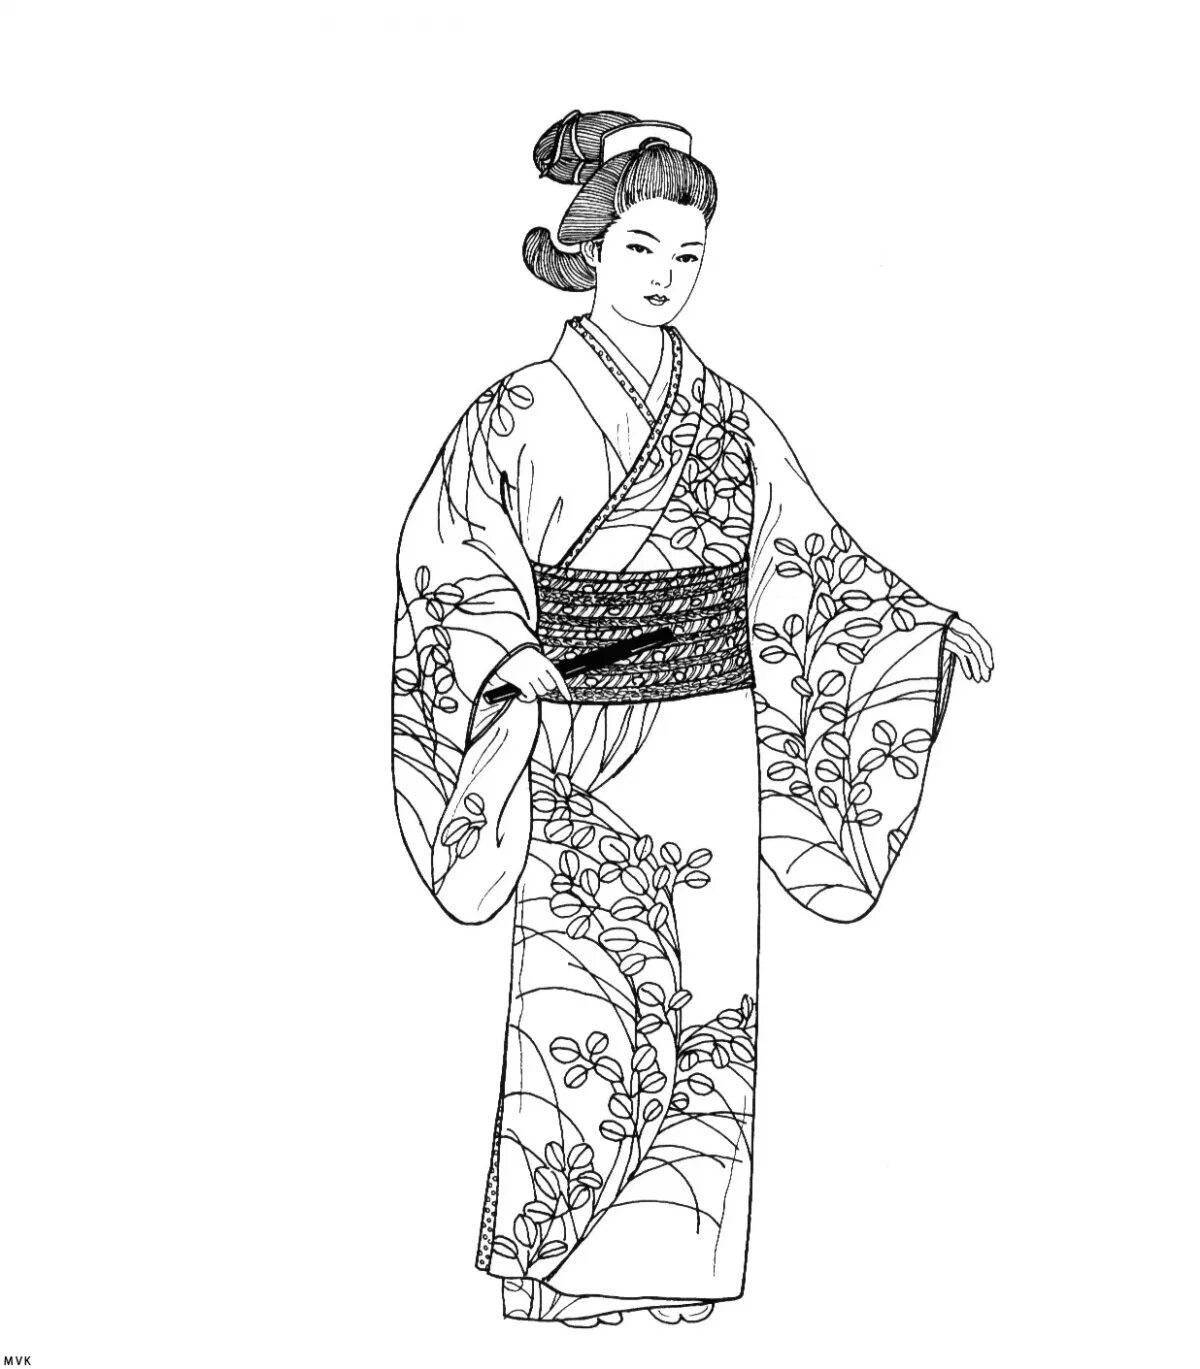 Awesome kimono coloring page for kids